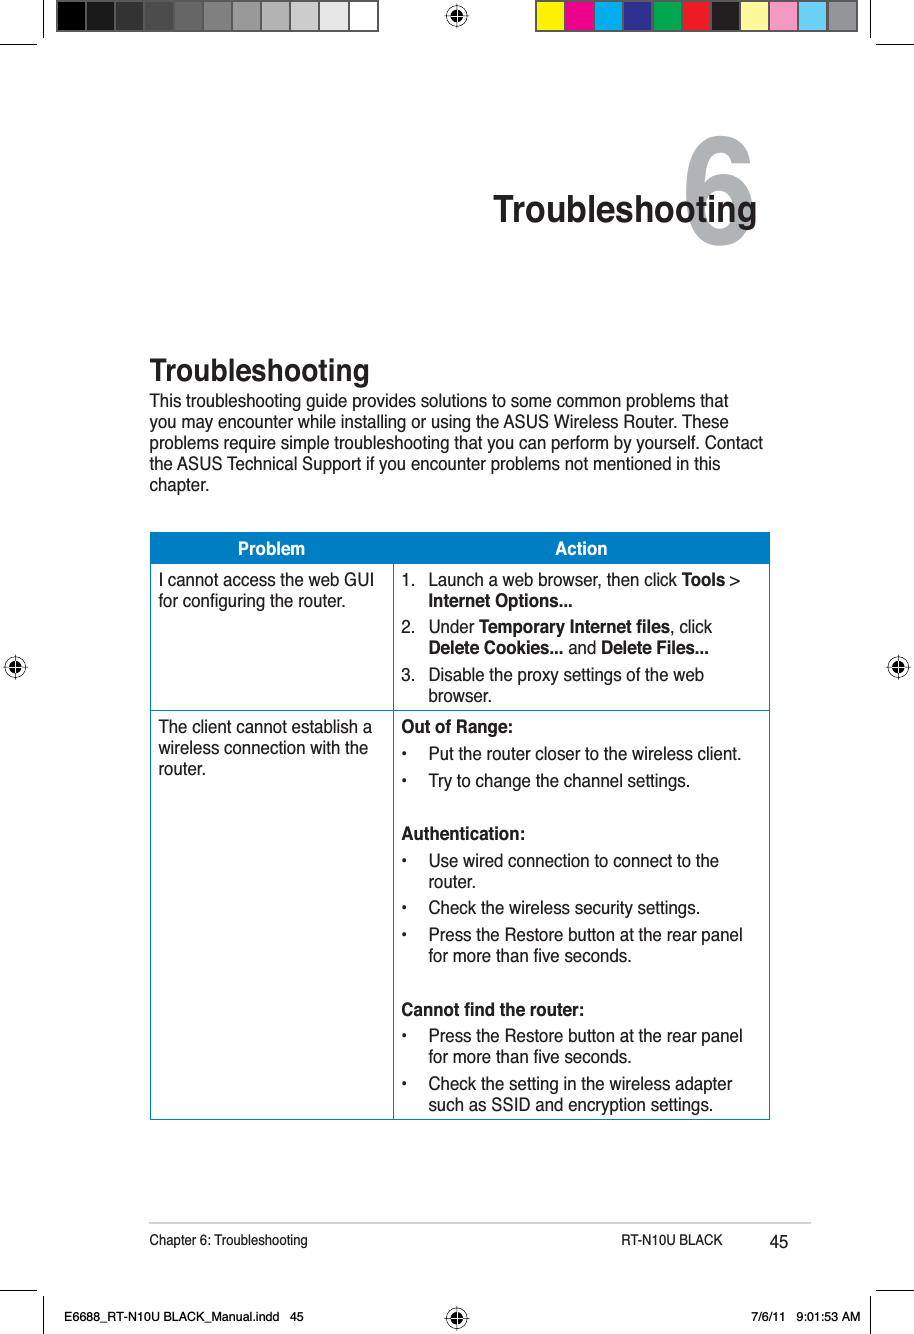 45Chapter 6: Troubleshooting           RT-N10U BLACK6TroubleshootingTroubleshootingThis troubleshooting guide provides solutions to some common problems that you may encounter while installing or using the ASUS Wireless Router. These problems require simple troubleshooting that you can perform by yourself. Contact the ASUS Technical Support if you encounter problems not mentioned in this chapter.Problem ActionI cannot access the web GUI IRUFRQÀJXULQJWKHURXWHU1. Launch a web browser, then click Tools &gt; Internet Options...2. Under 7HPSRUDU\,QWHUQHWÀOHV, click Delete Cookies... and Delete Files...3. Disable the proxy settings of the web browser.The client cannot establish a wireless connection with the router.Out of Range:• Put the router closer to the wireless client.• Try to change the channel settings.Authentication:• Use wired connection to connect to the router.• Check the wireless security settings.• Press the Restore button at the rear panel IRUPRUHWKDQÀYHVHFRQGV&amp;DQQRWÀQGWKHURXWHU• Press the Restore button at the rear panel IRUPRUHWKDQÀYHVHFRQGV• Check the setting in the wireless adapter such as SSID and encryption settings.E6688_RT-N10U BLACK_Manual.indd   45 7/6/11   9:01:53 AM